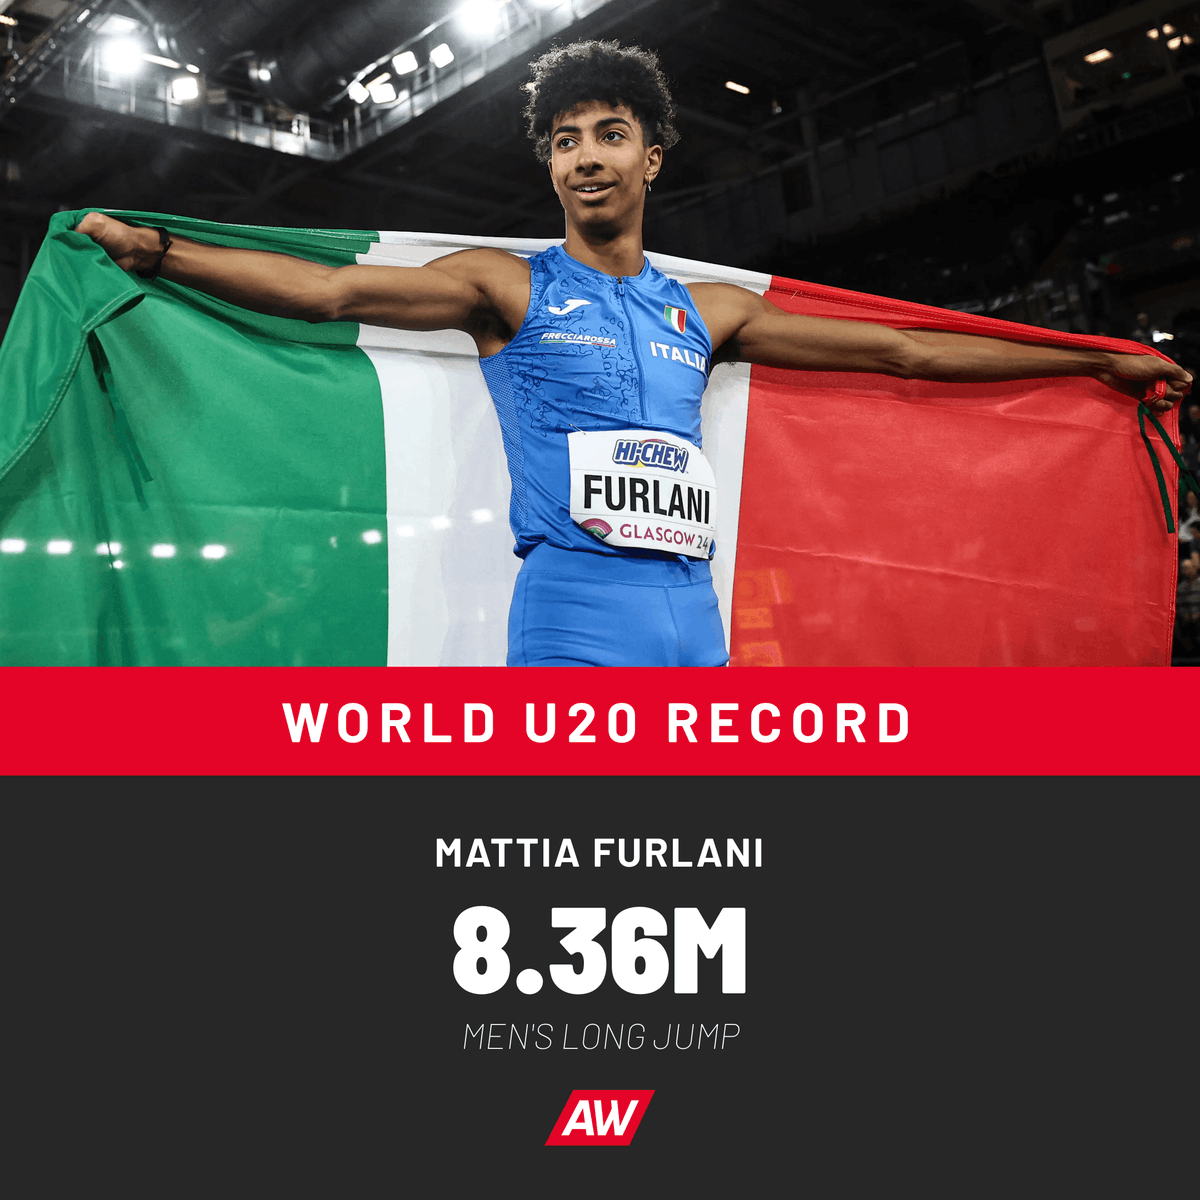 WORLD U20 RECORD Mattia Furlani keeps on re-writing history 🔥 The world indoor long jump silver medallist has just set the world U20 record in the event at Meeting Città di Savona 🇮🇹 The 19-year-old jumps an amazing 8.36m (1.4), breaking Sergey Morgunov's 8.35m from 2012 🤯